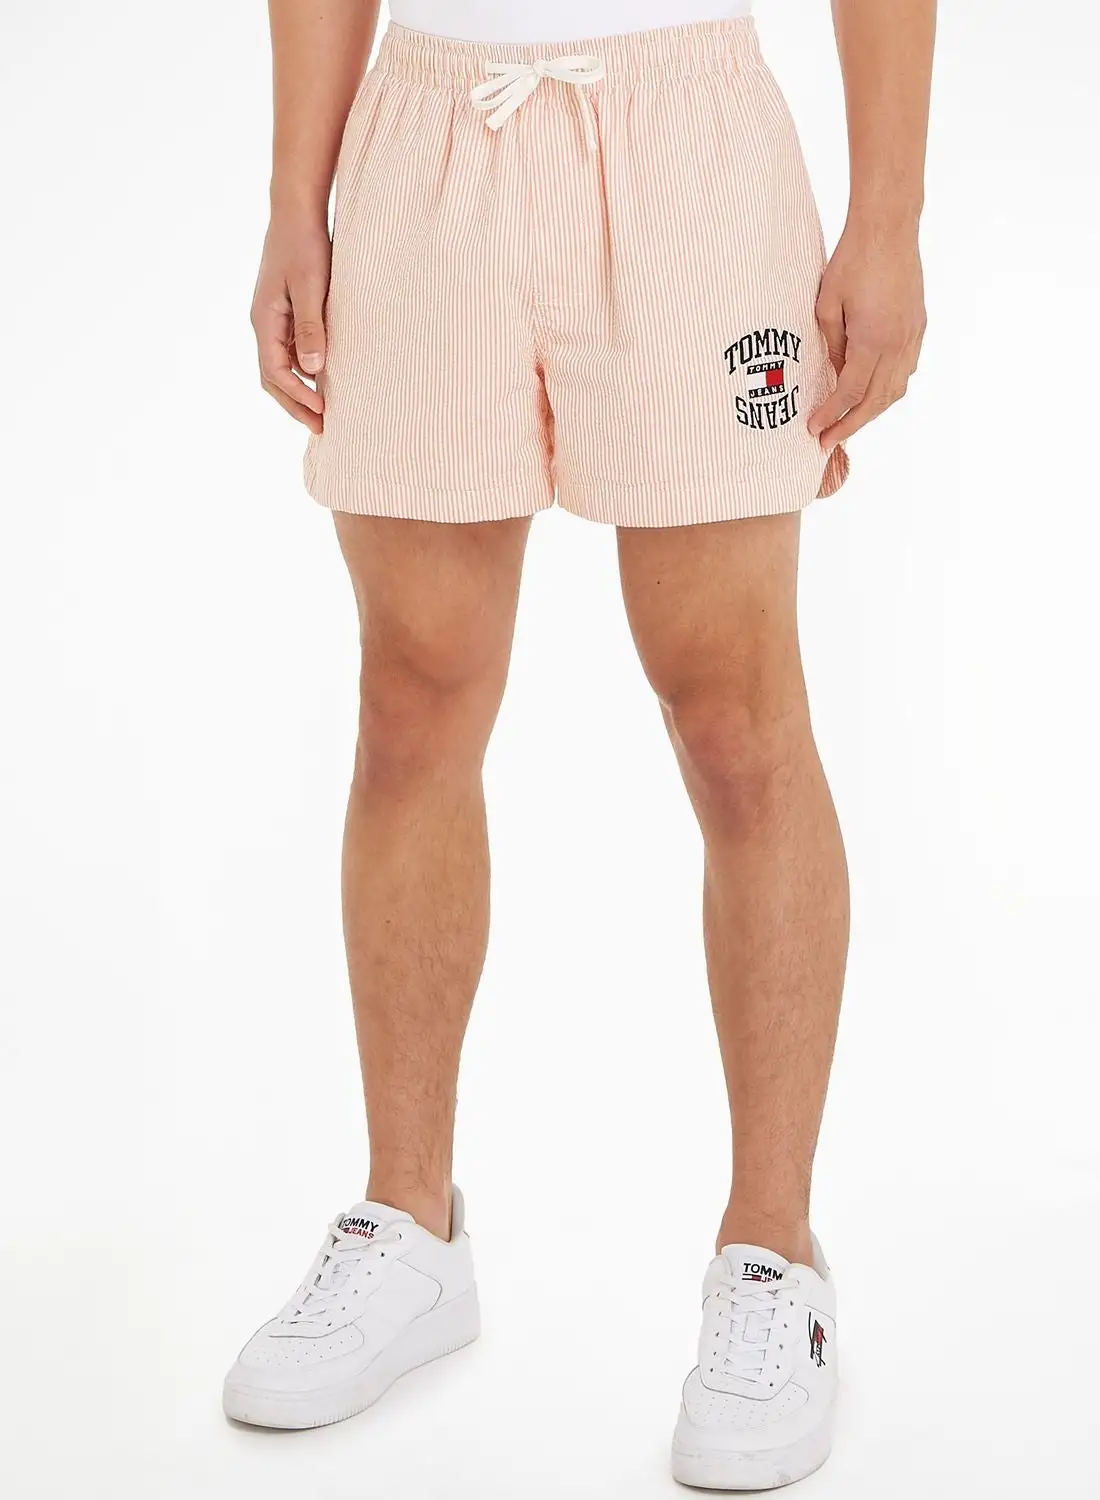 TOMMY JEANS Logo Printed Short